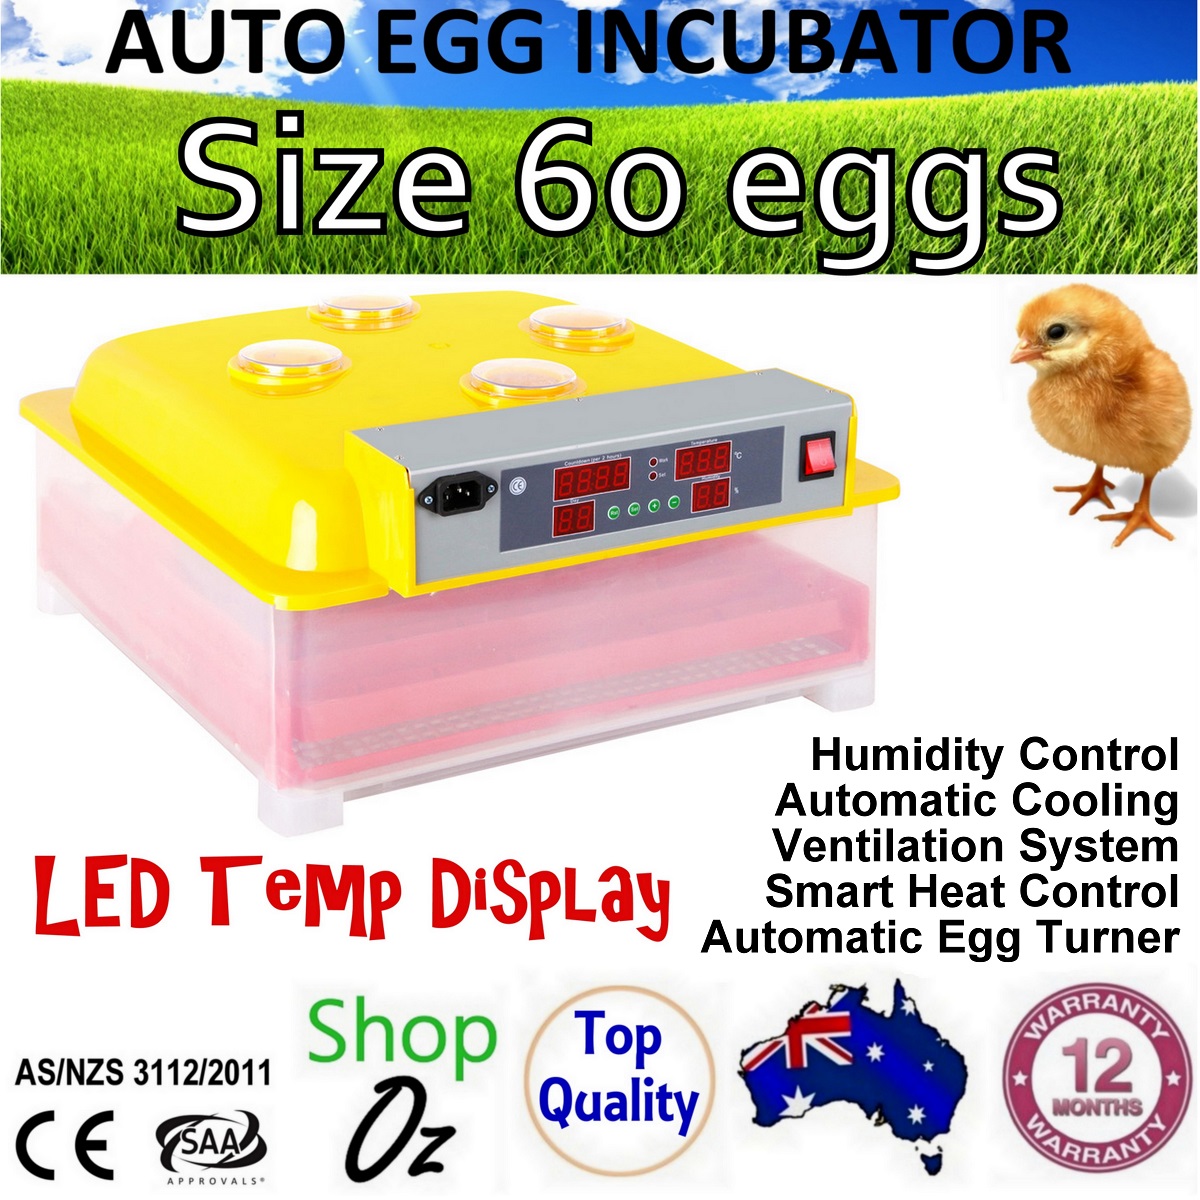 New 60 EGG AUTOMATIC CHICKEN INCUBATOR Poultry Turning Digital LED 